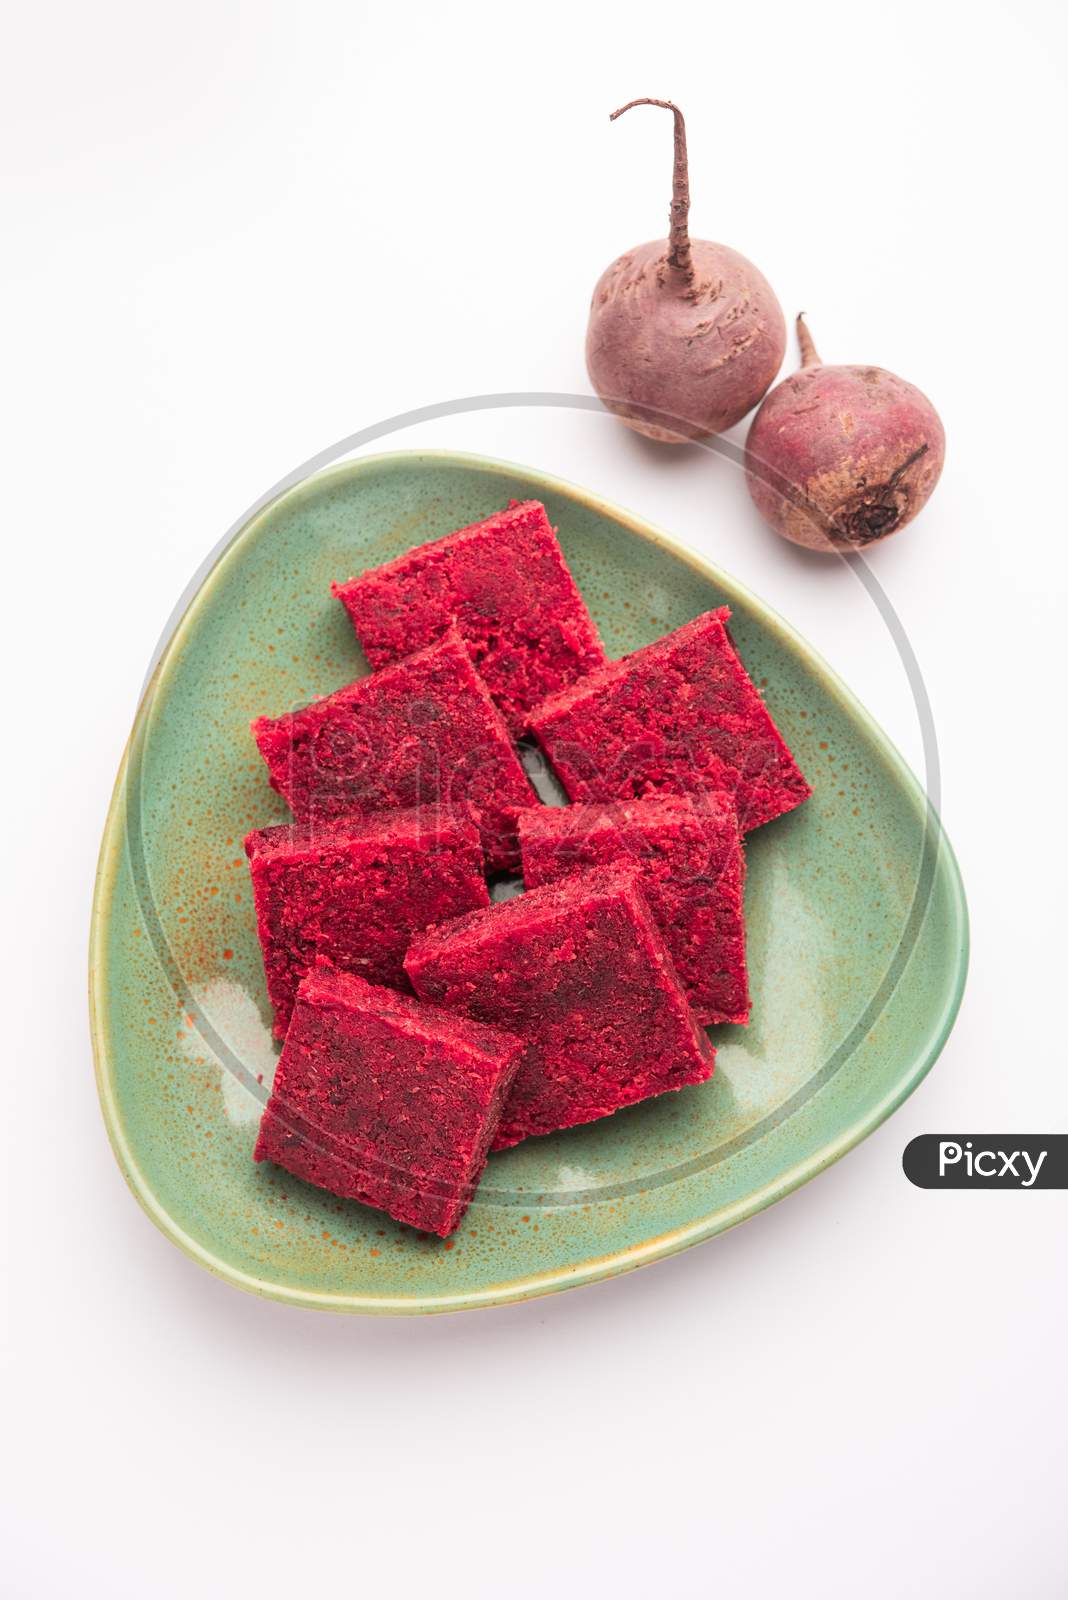 Beetroot Barfi Or Barfee Or Burfi Is An Indian Healthy Sweet With Raw Root Vegetable